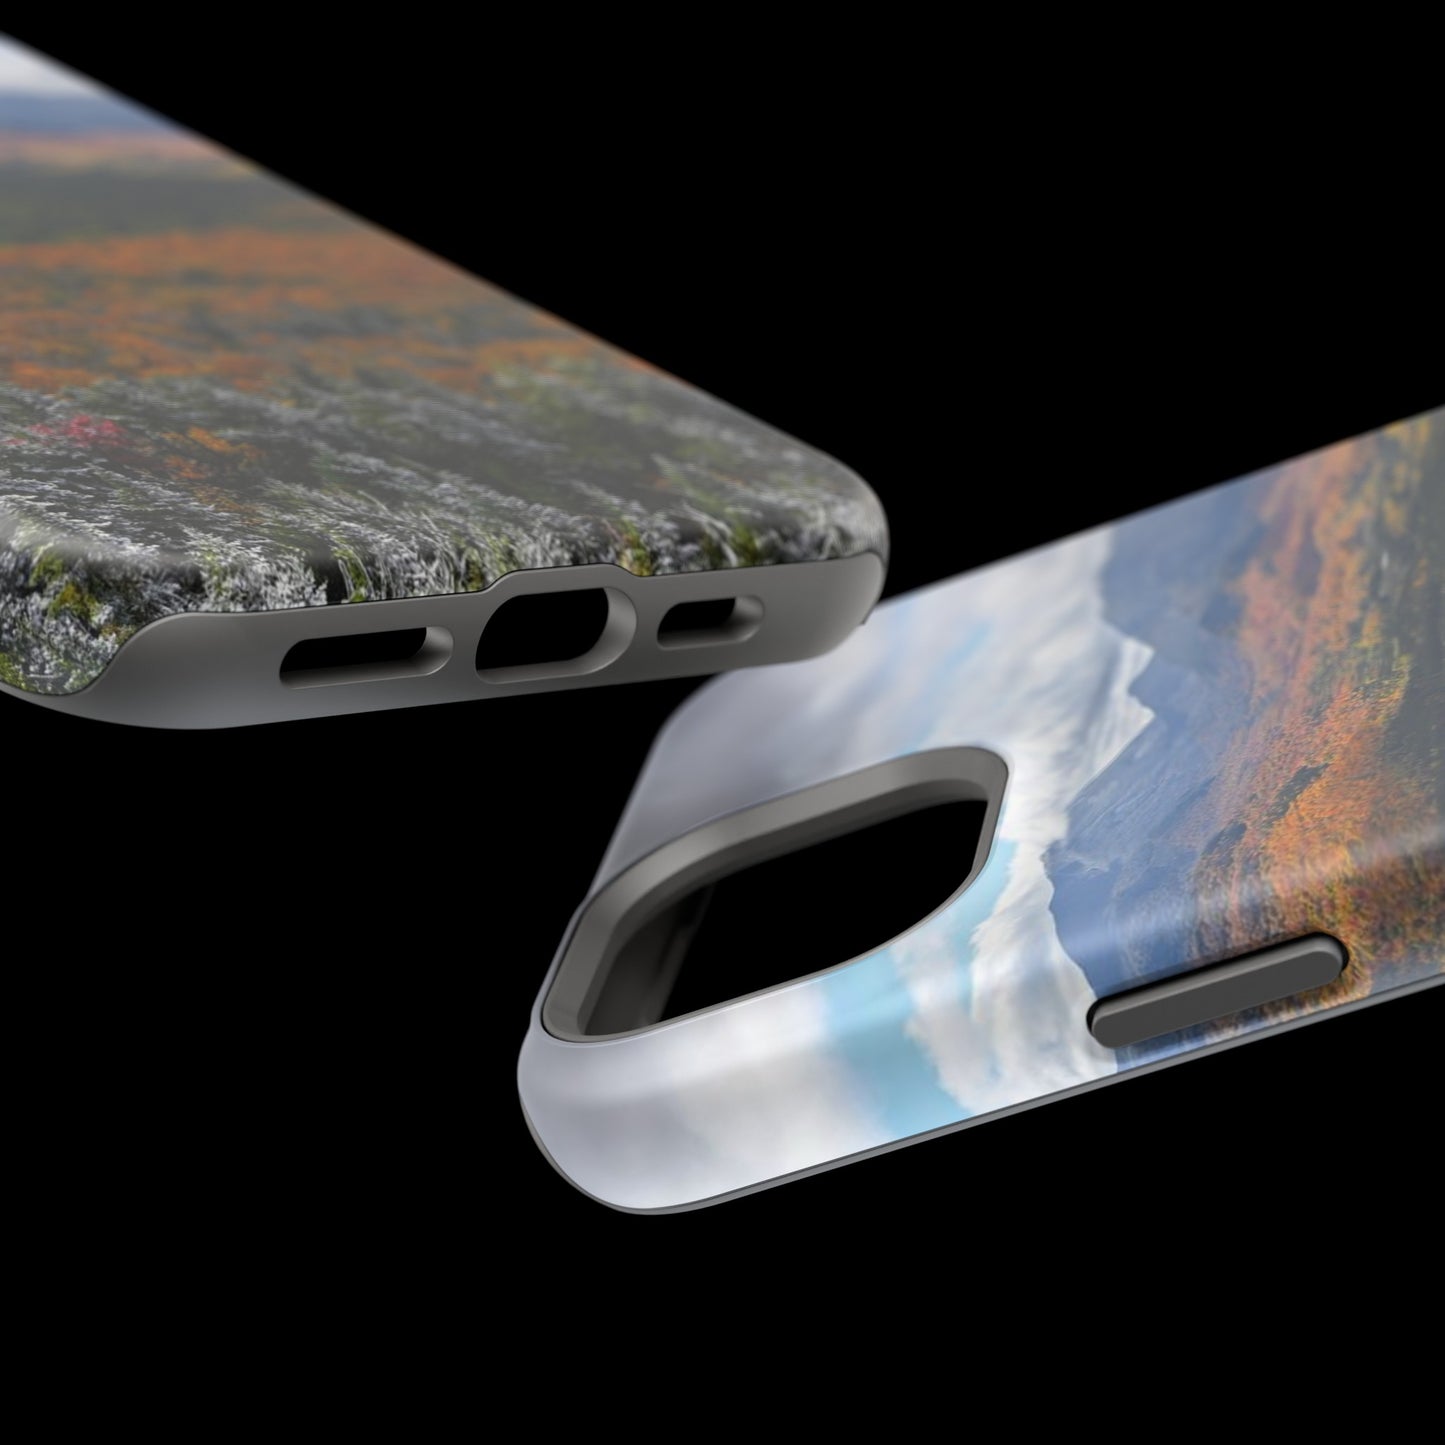 MagSafe Impact Resistant Phone Case - Frosty Fall Day, Mt. Van Hoevenberg